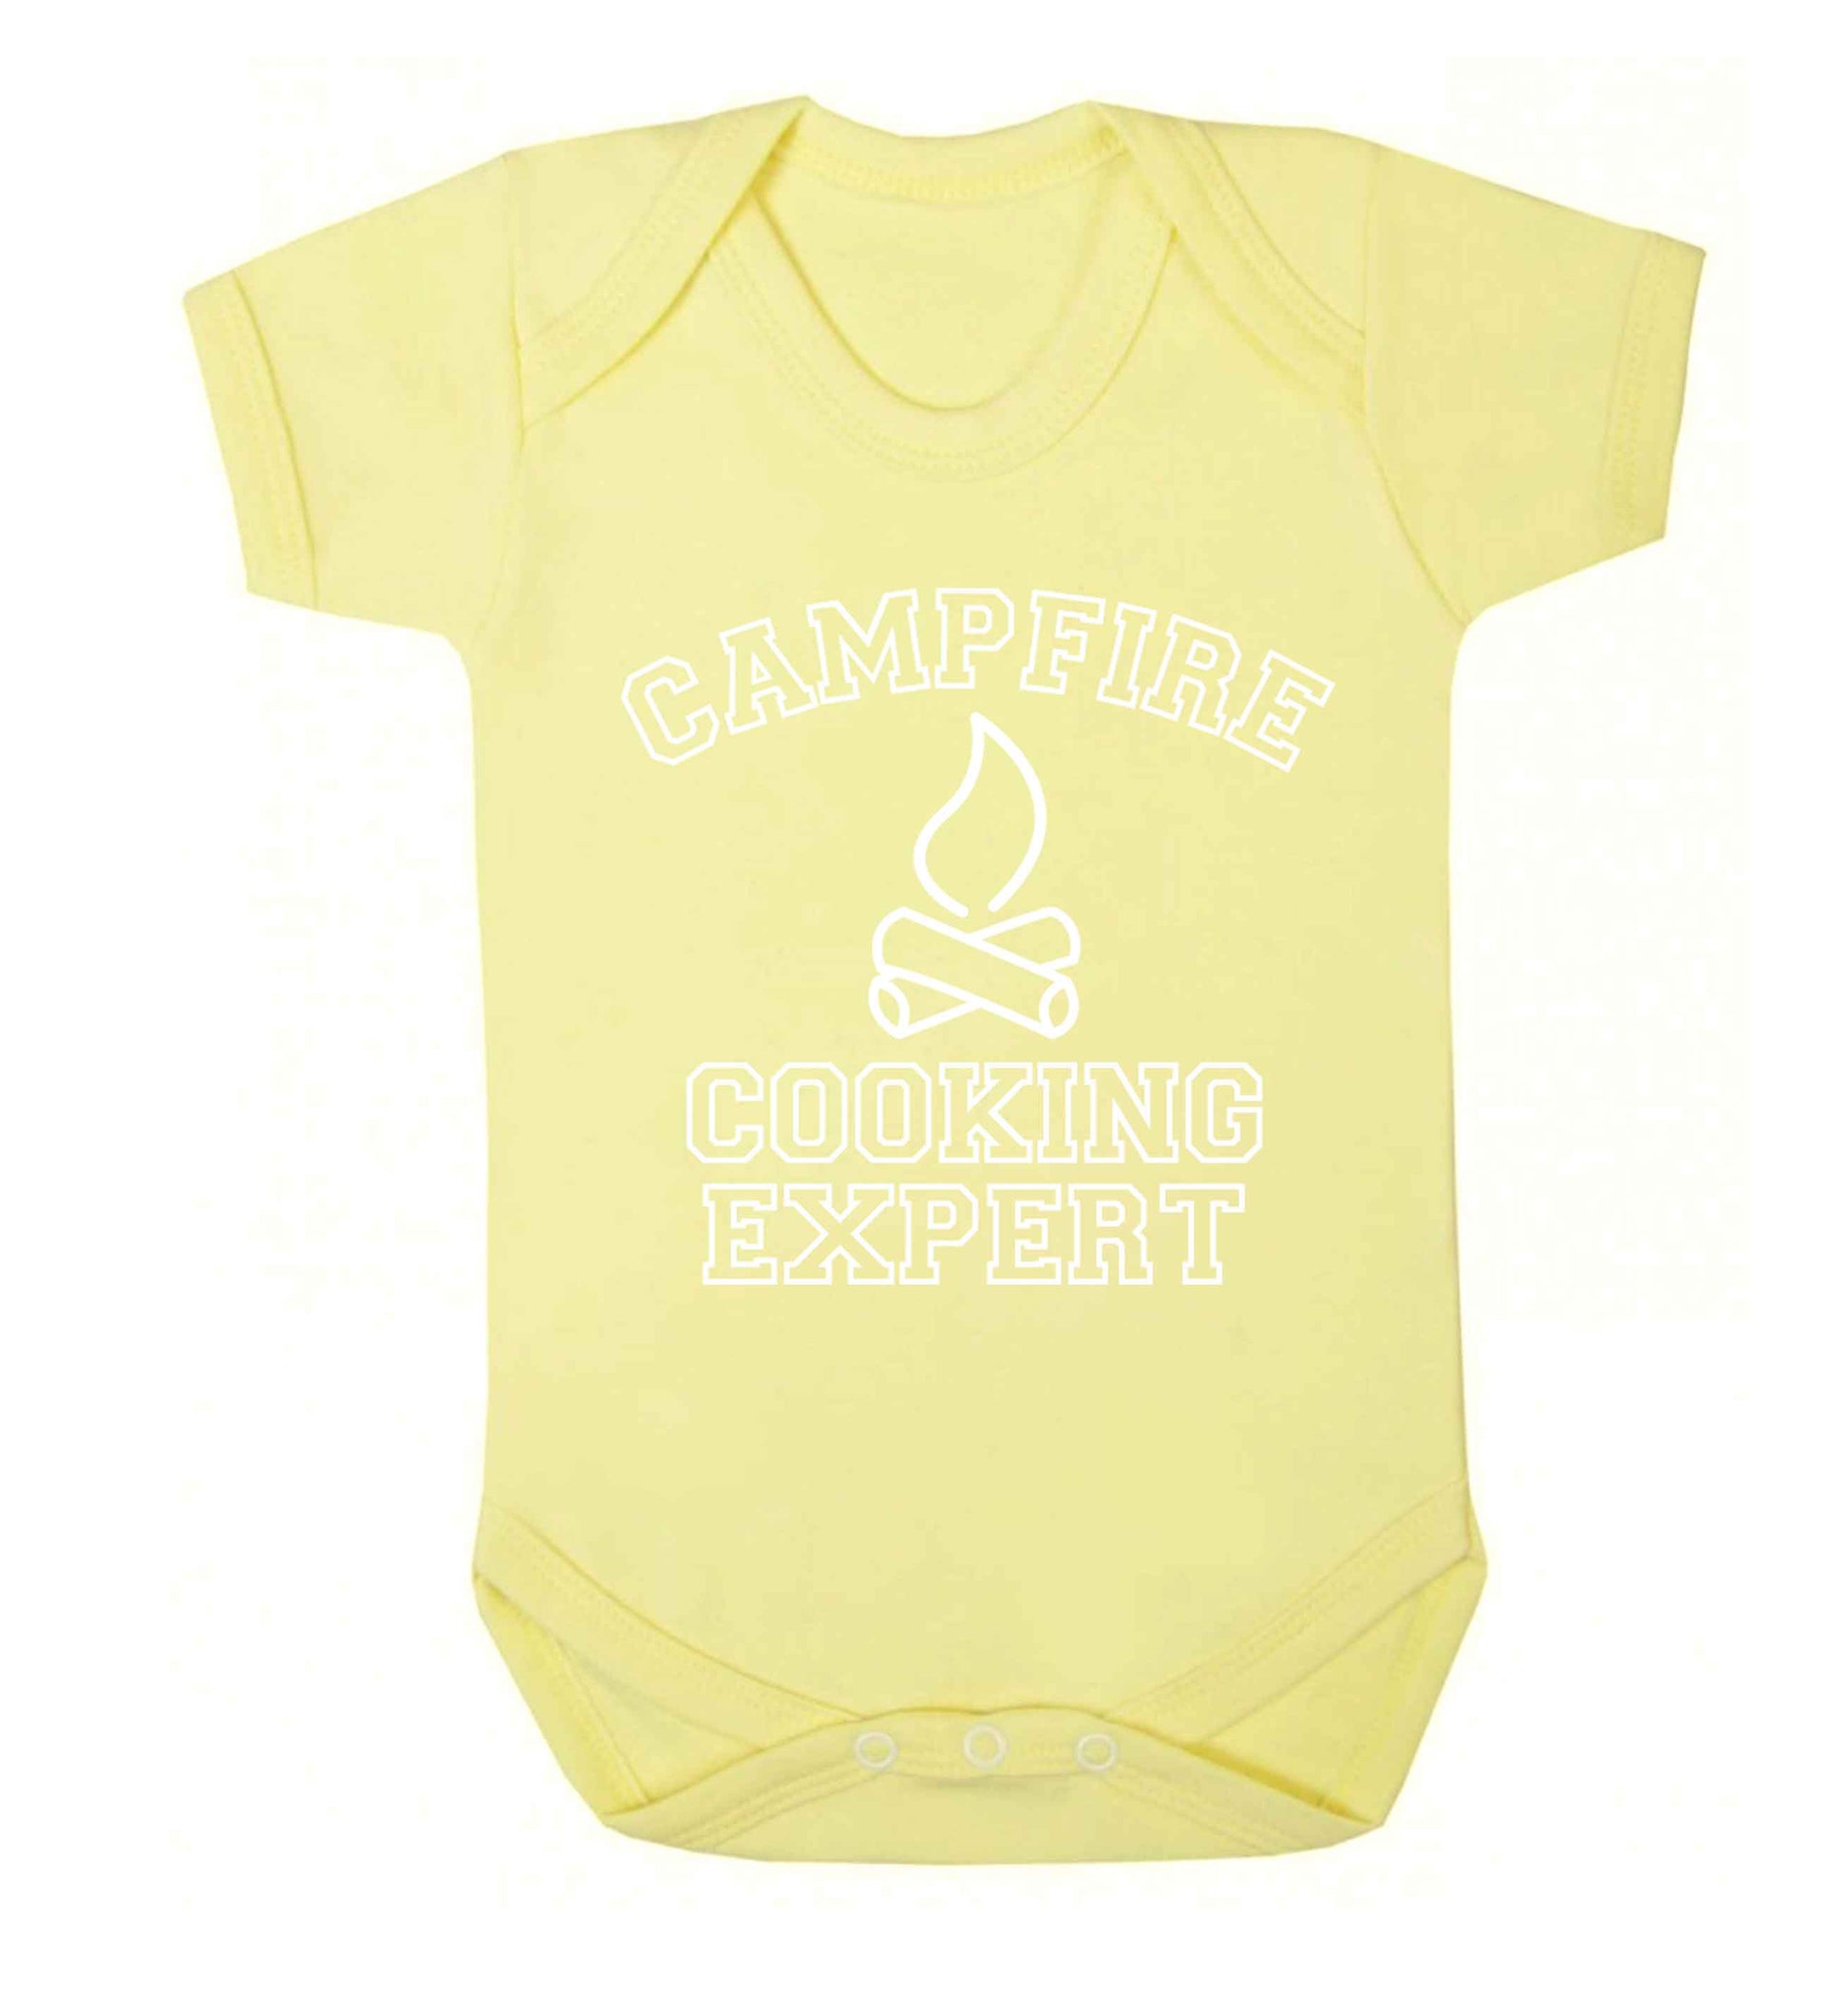 Campfire cooking expert Baby Vest pale yellow 18-24 months